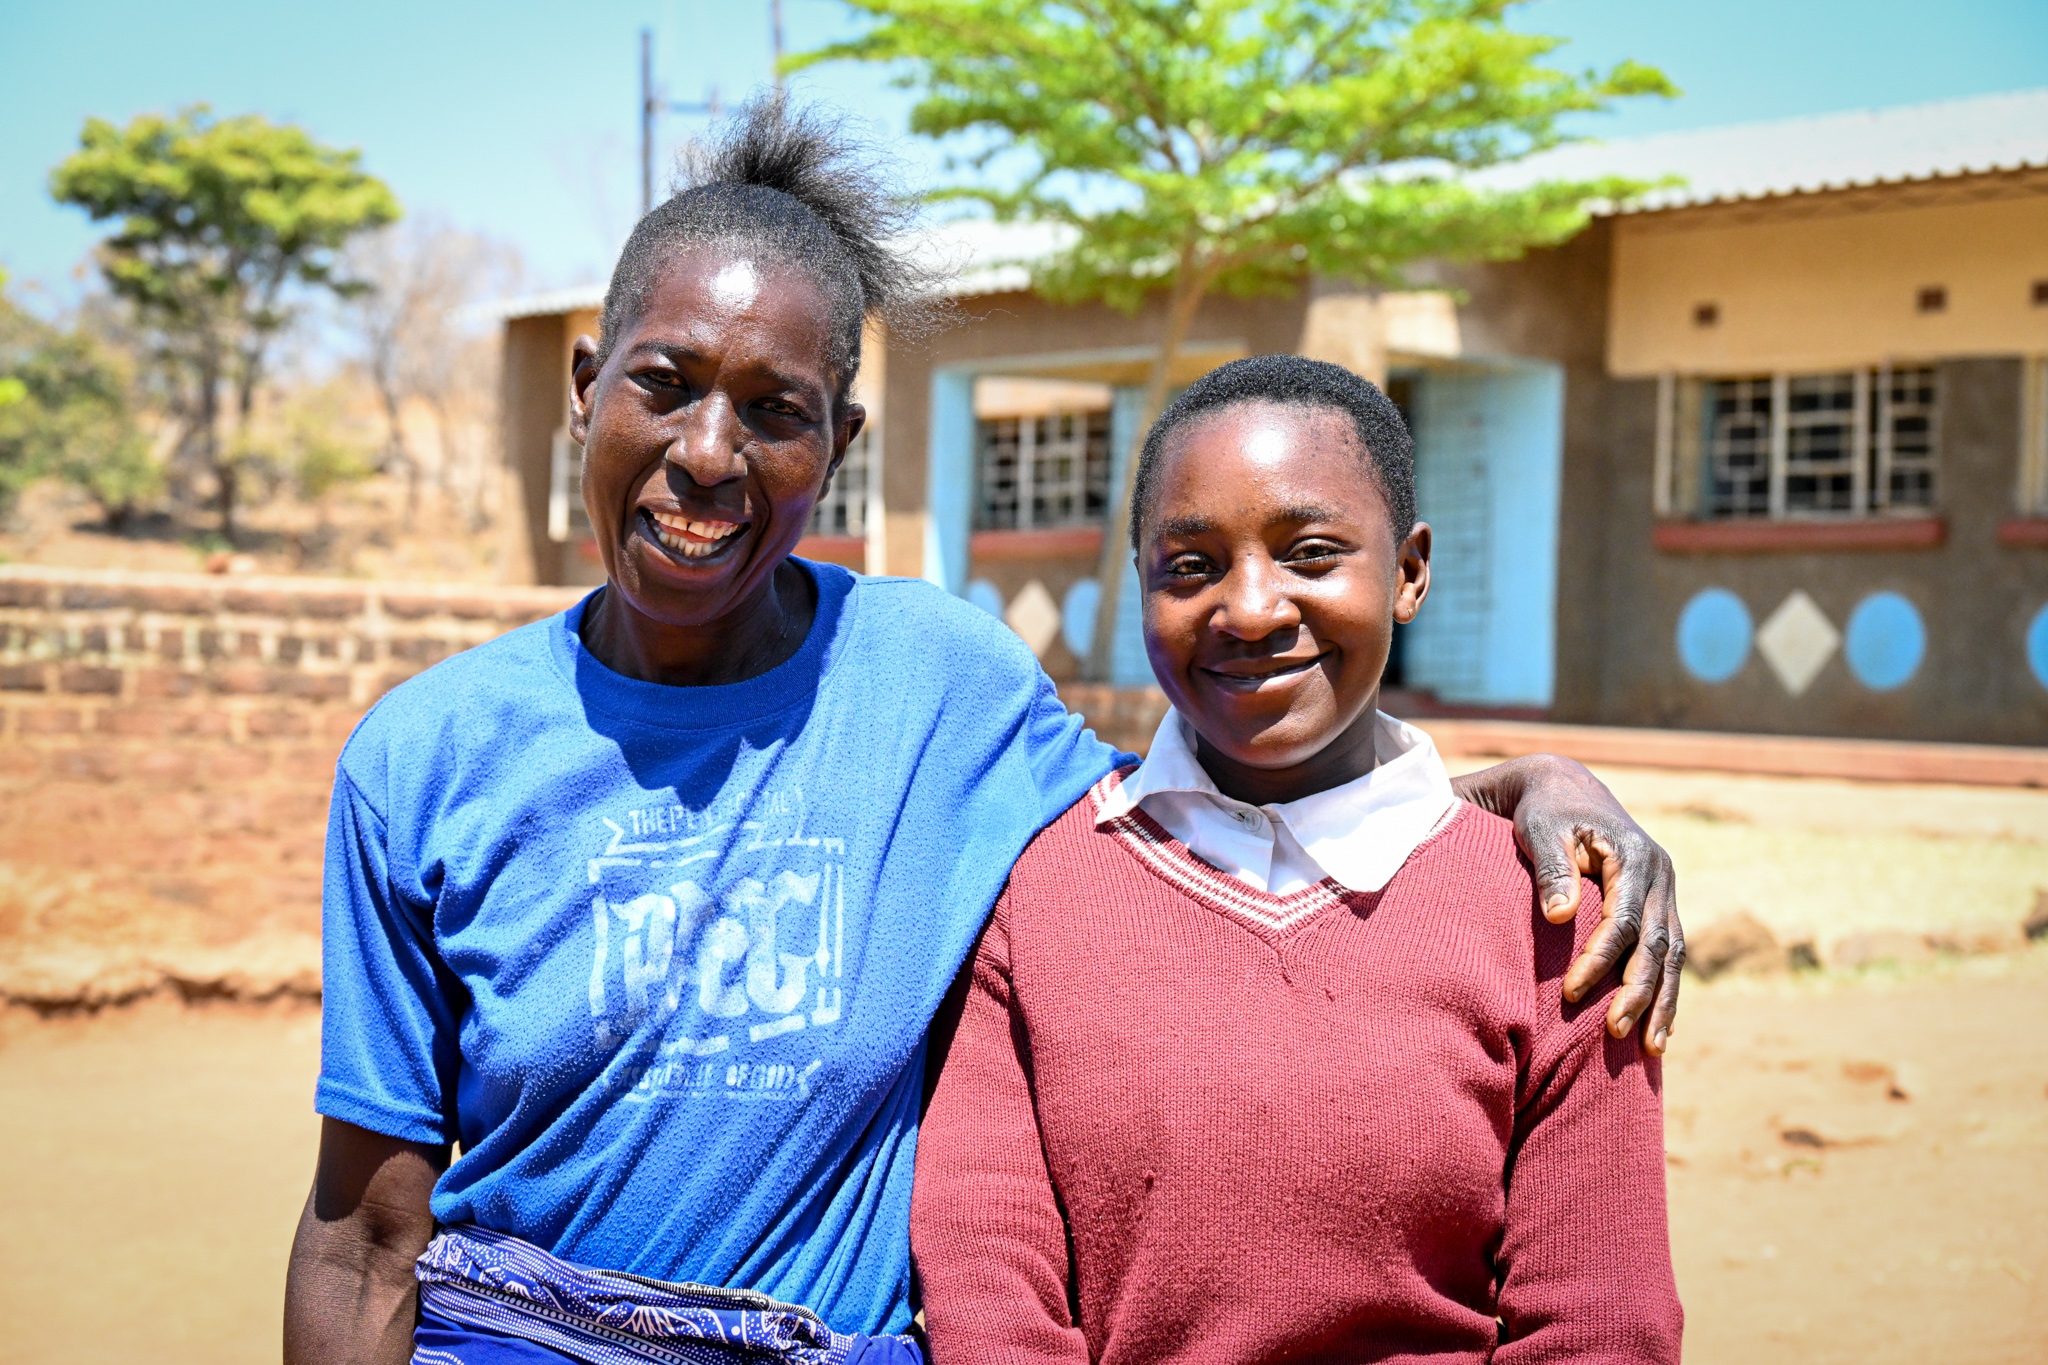 Joyce stands with a female pupil from the school she founded - both smile contentedly